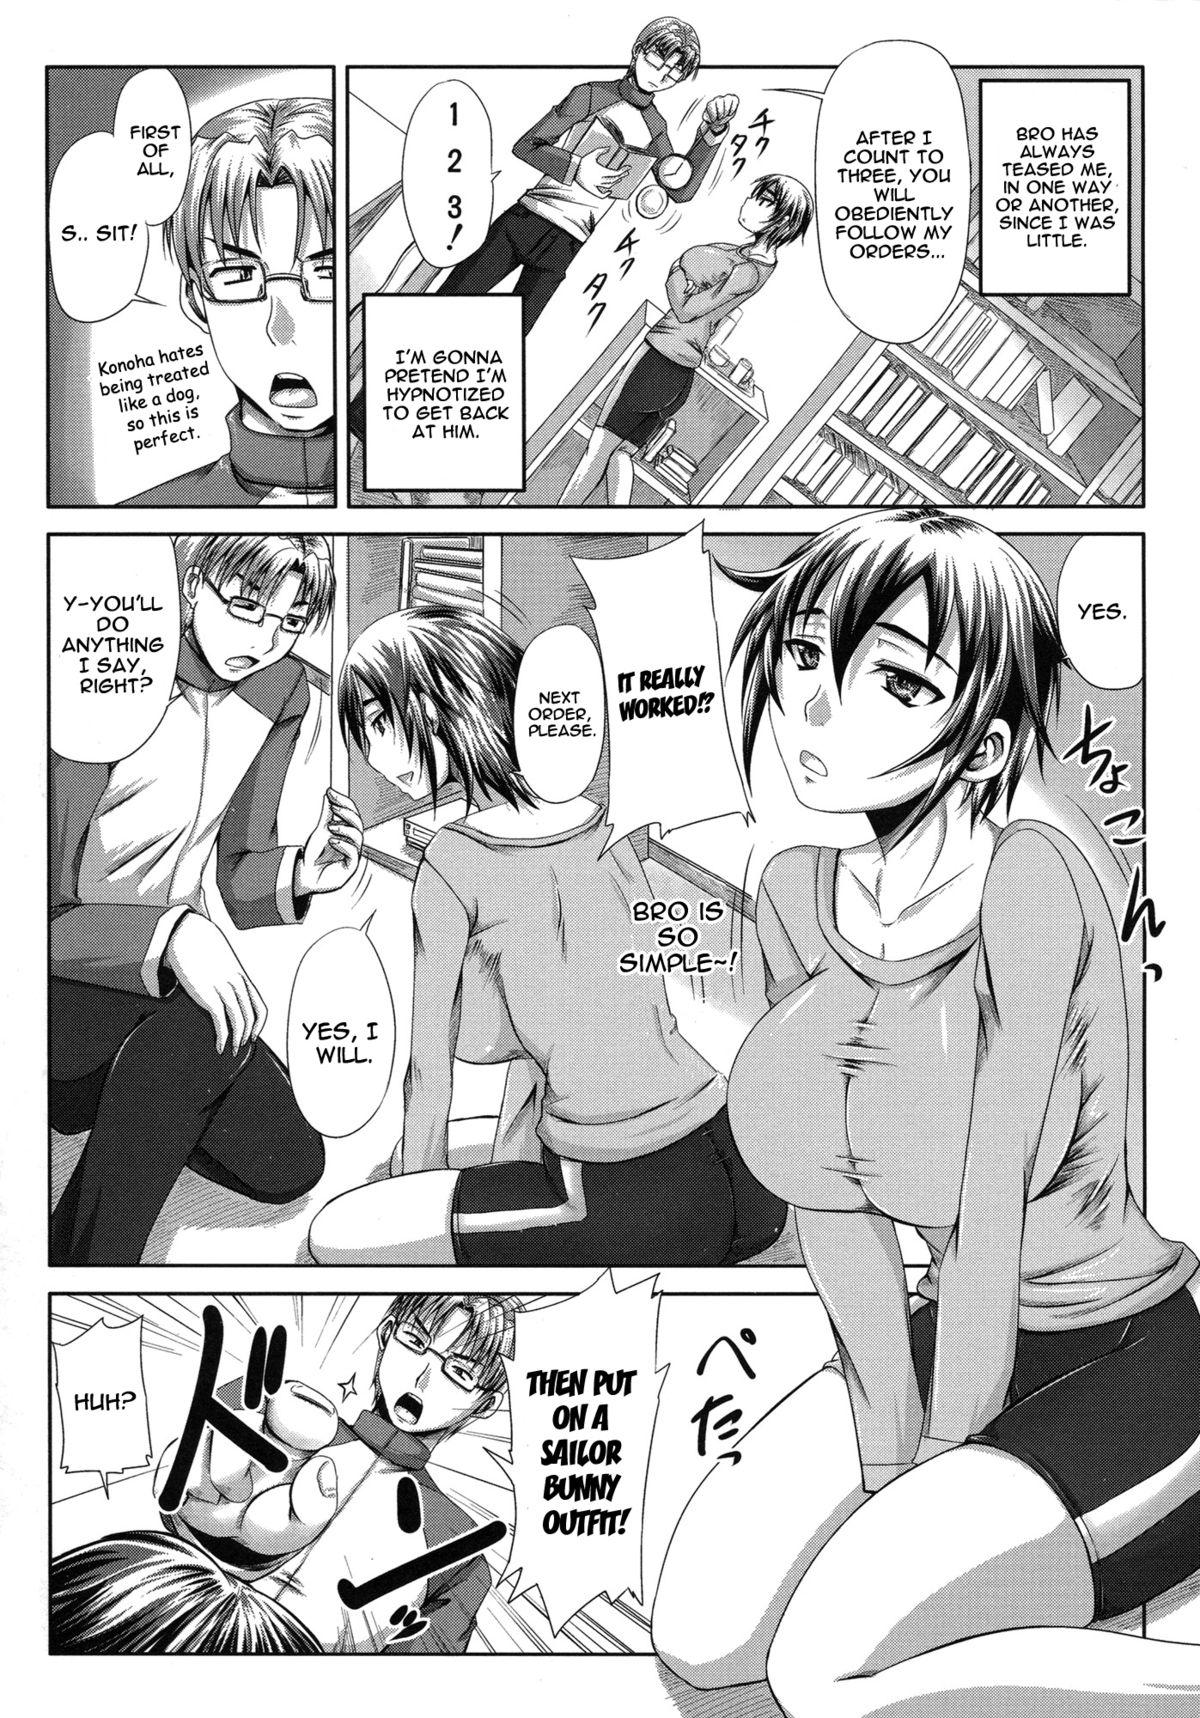 [Akigami Satoru] Tsukurou! Onaho Ane - Let's made a Sex Sleeve from Sister | Turning My Elder-Sister into a Sex-Sleeve [English] {doujin-moe.us} 159